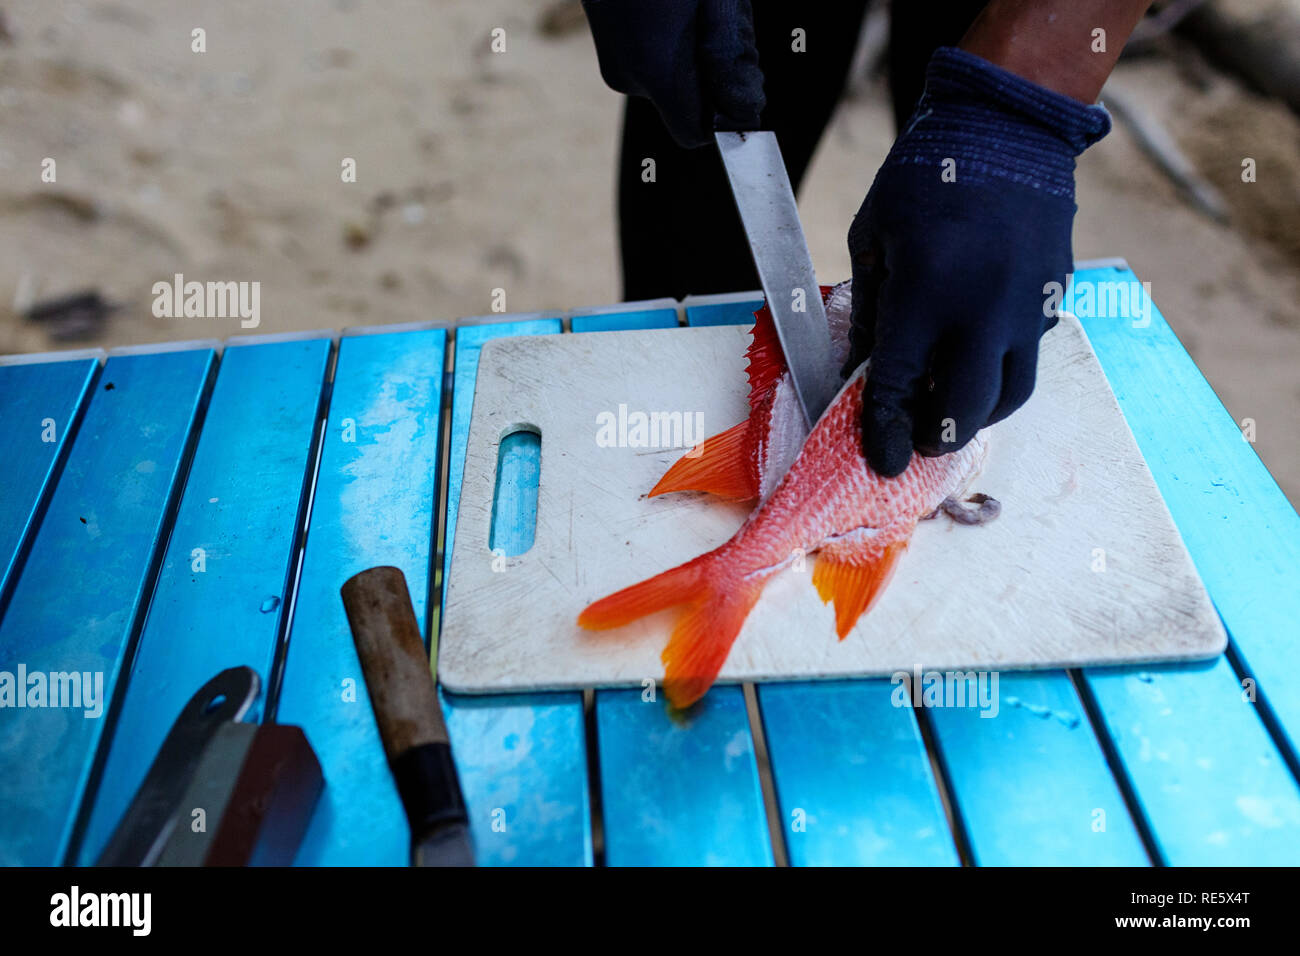 Japanese fisherman preparing freshly caught fish for dinner with a knife on tropical beach, Iriomote, Japan Stock Photo